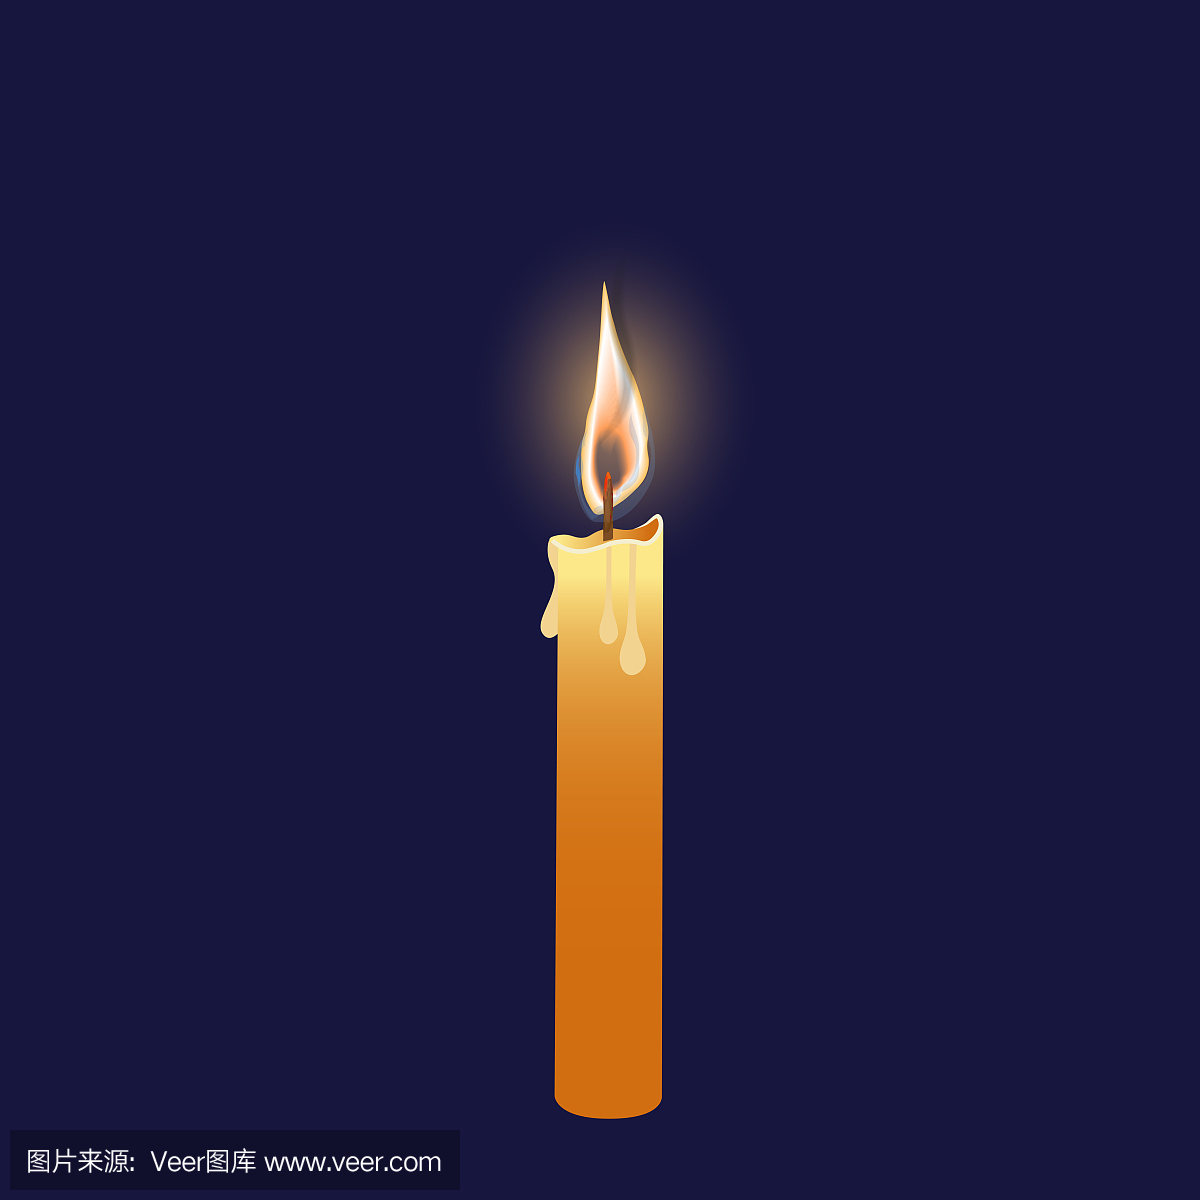 Burning candle vector